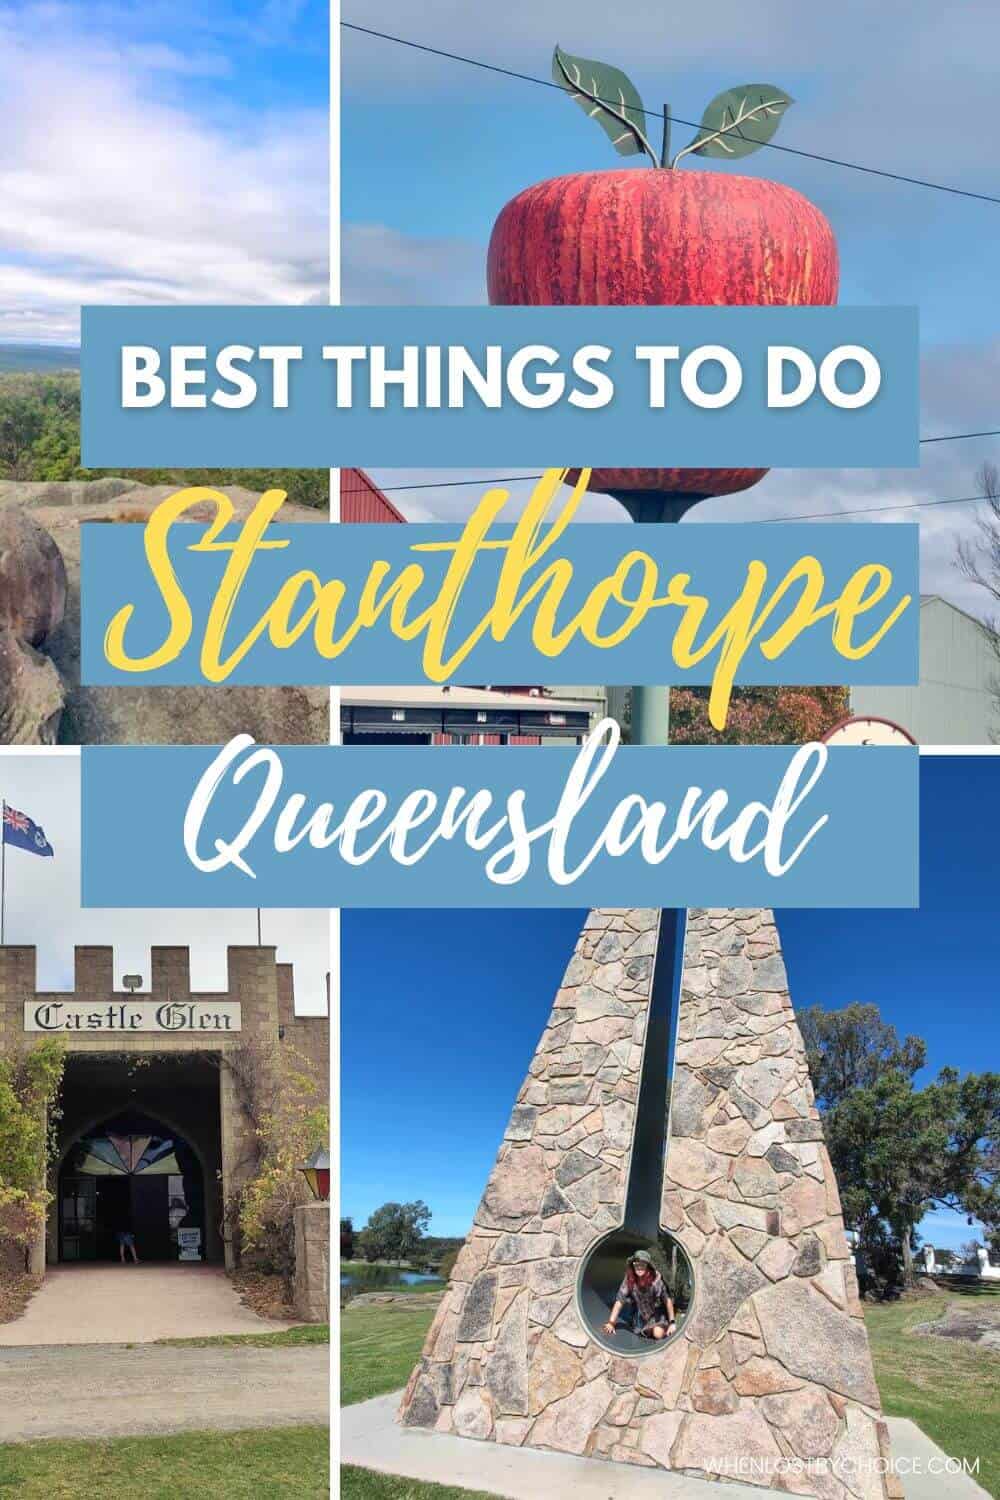 best things to do in stanthorpe and granite belt region